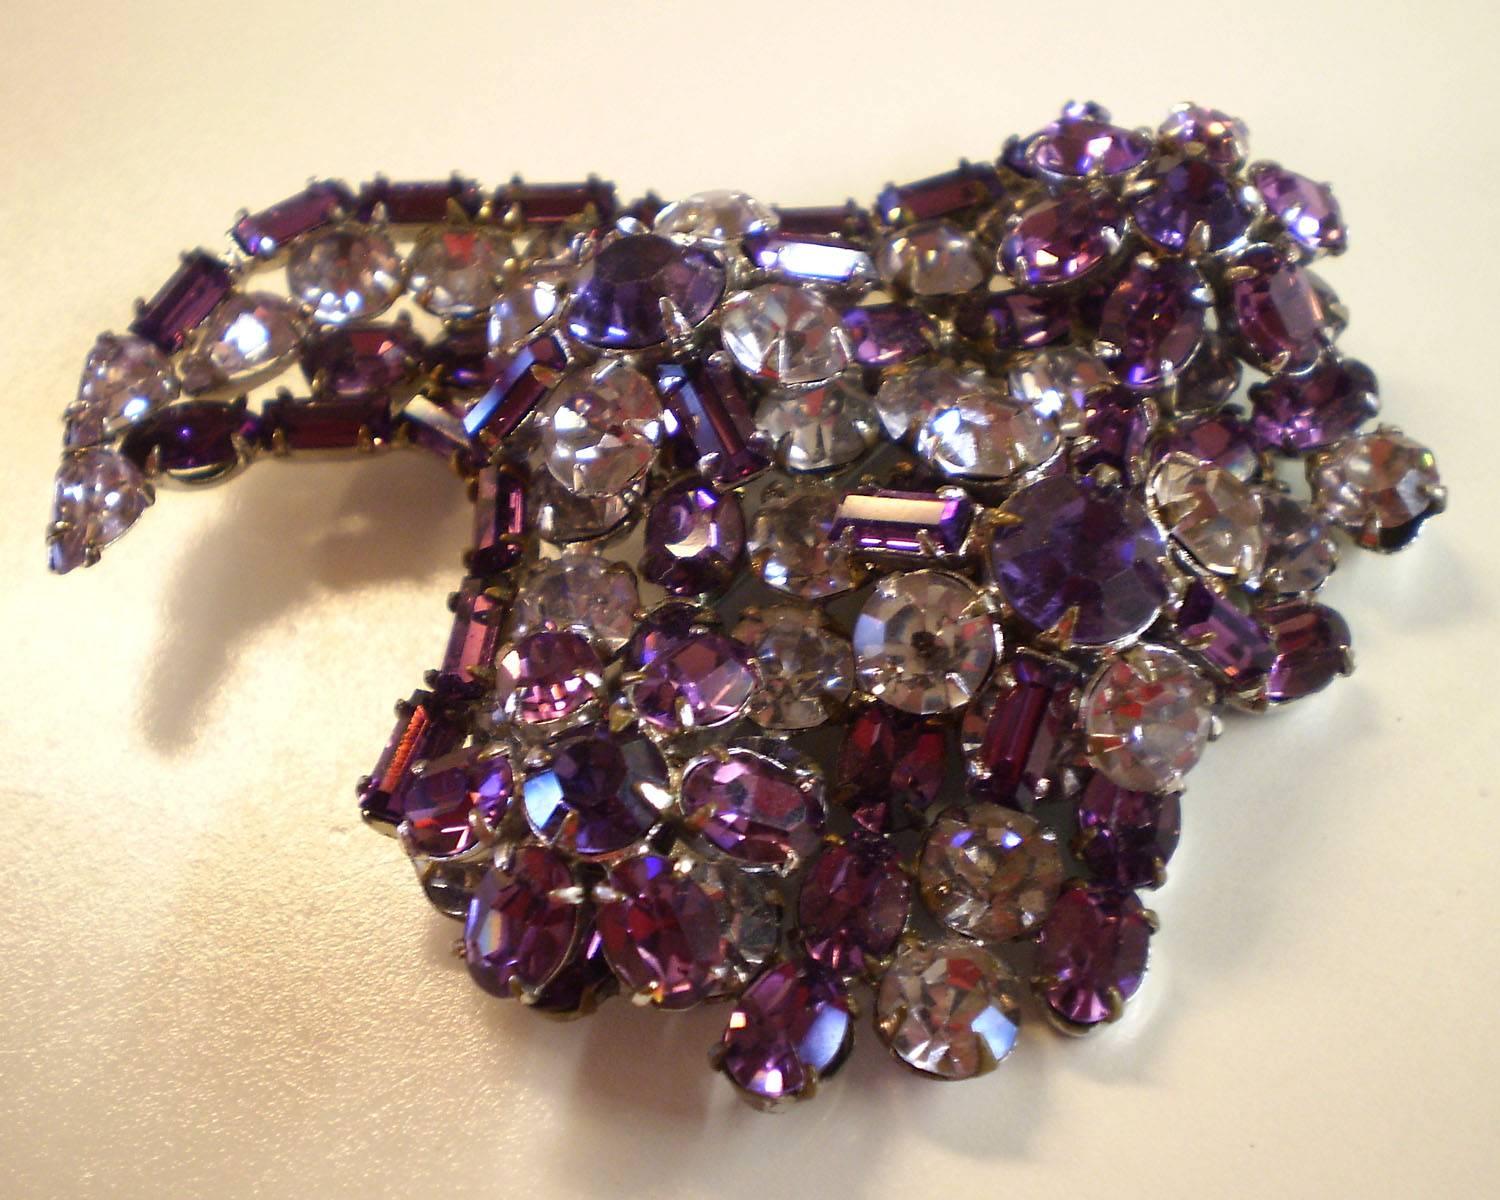 This lovely brooch by Schreiner depicts a stylized cornucopia form, a symbol of luxury and abundance. Gorgeous shades of purple and lilac and many variation of stone shapes and sizes and colors make Schreiner brooches particularly sought after.